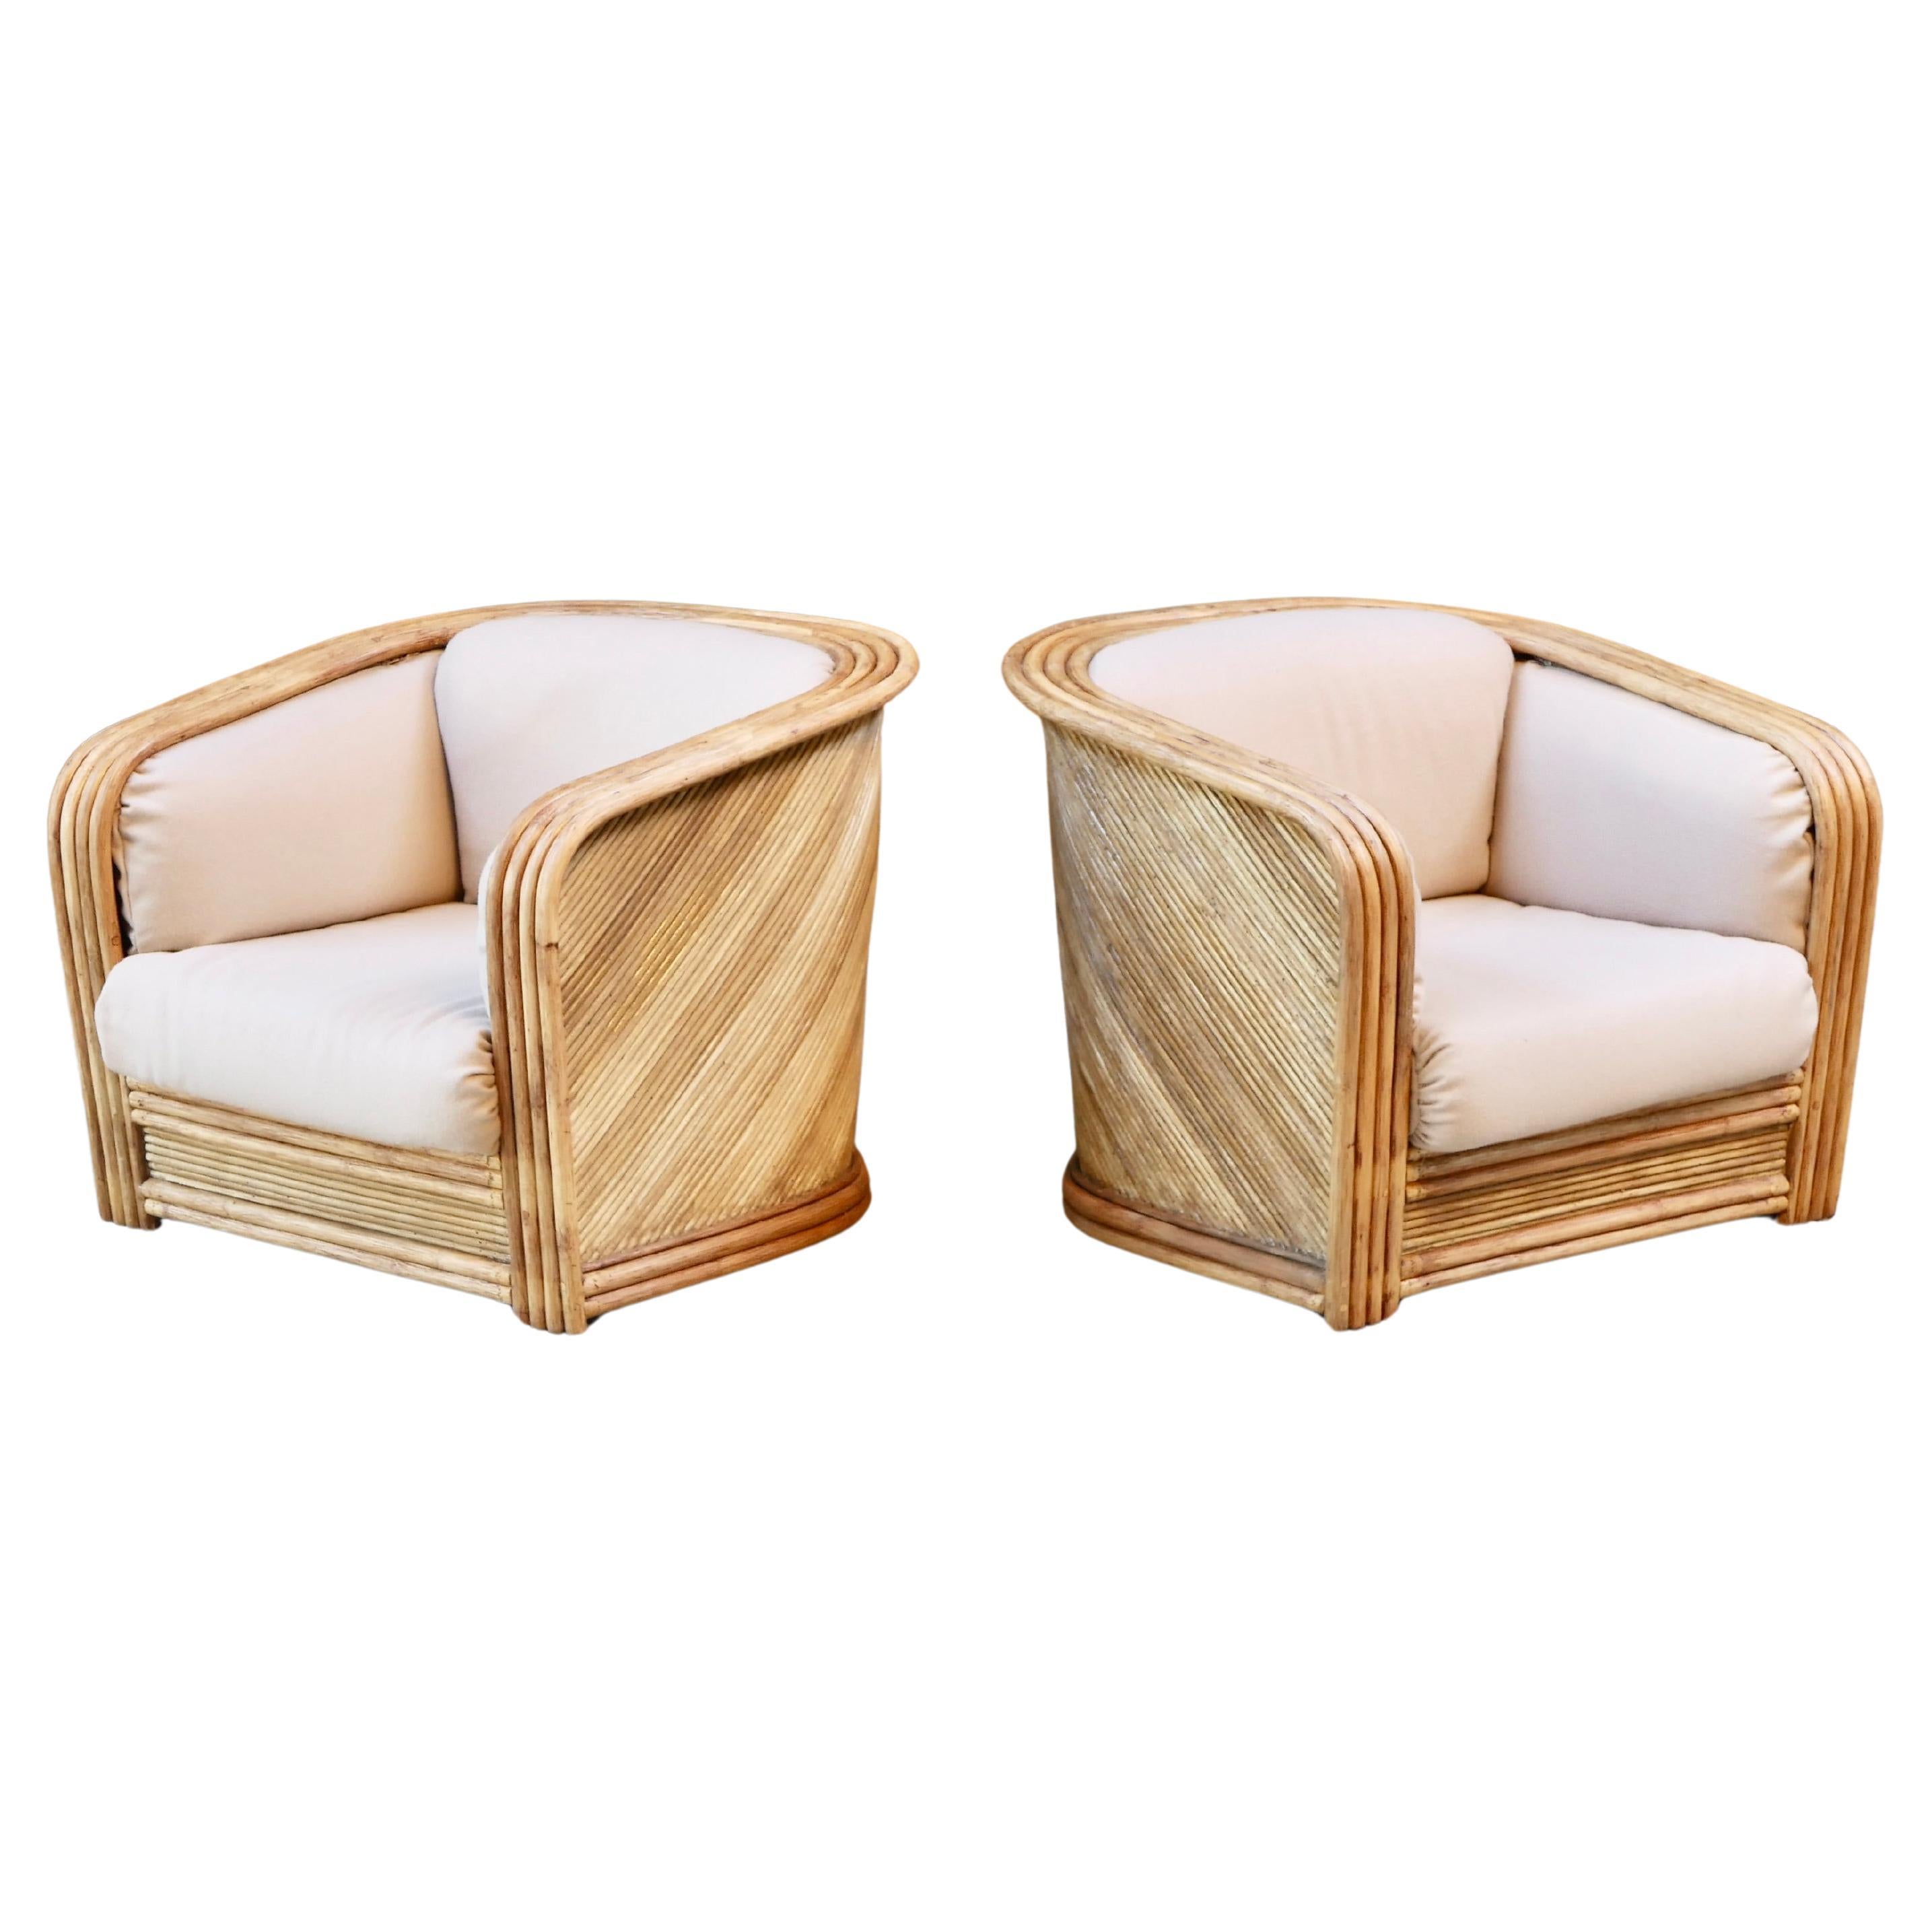 Bohemian Set of two rattan armchairs by Maugrion, for Roche Bobois, France, 1980s